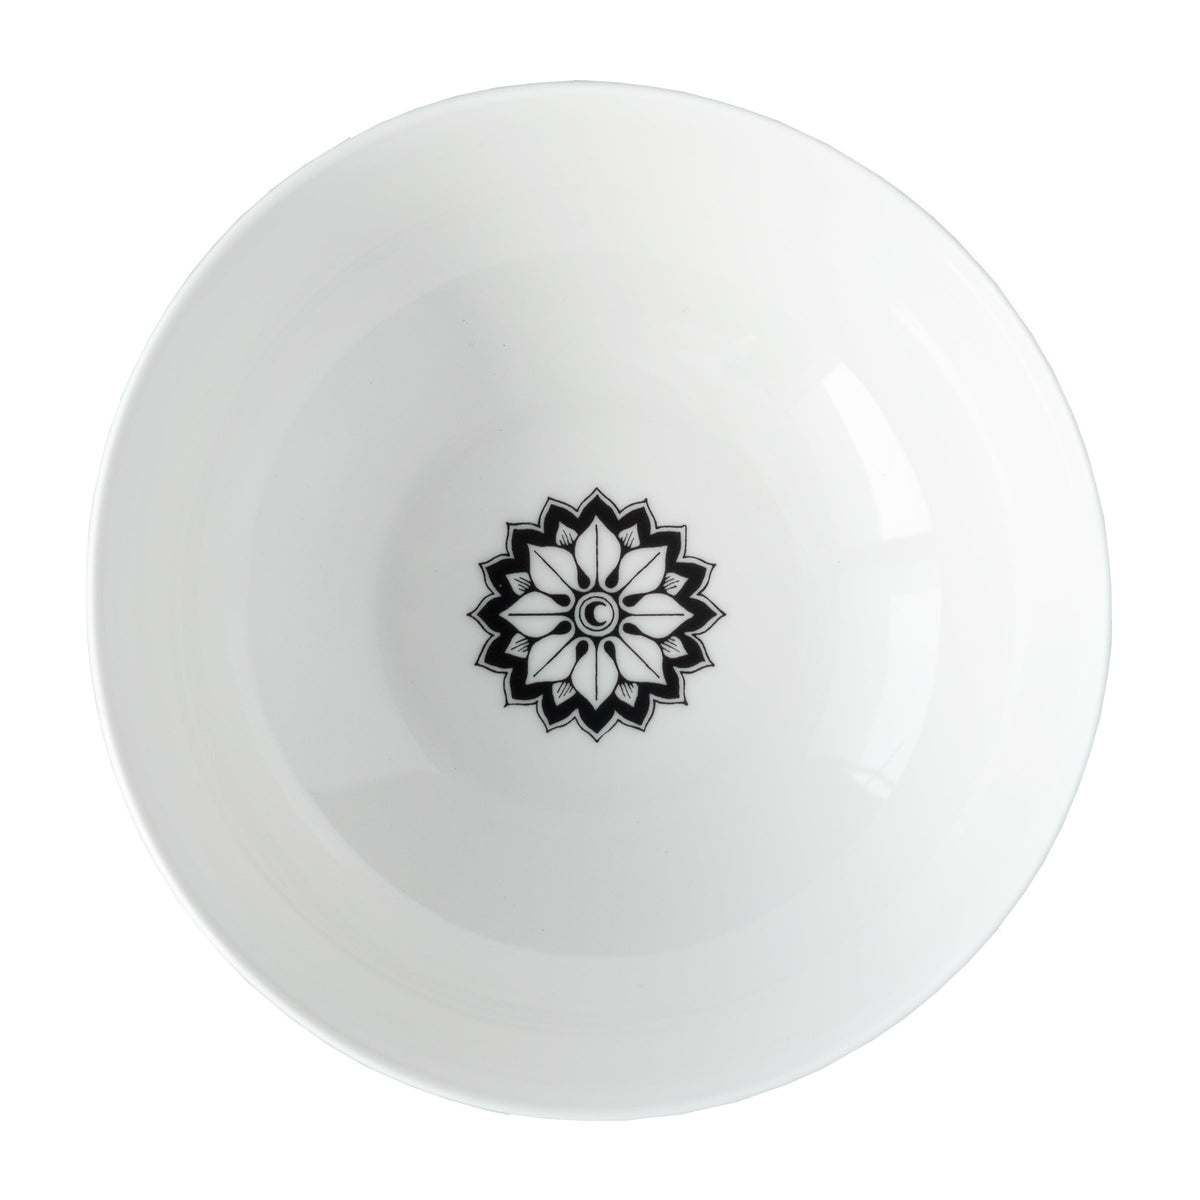 A white Marrakech Vegetable Serving Bowl with a black flower design on it from the Caskata Artisanal Home Geometrics Collection.